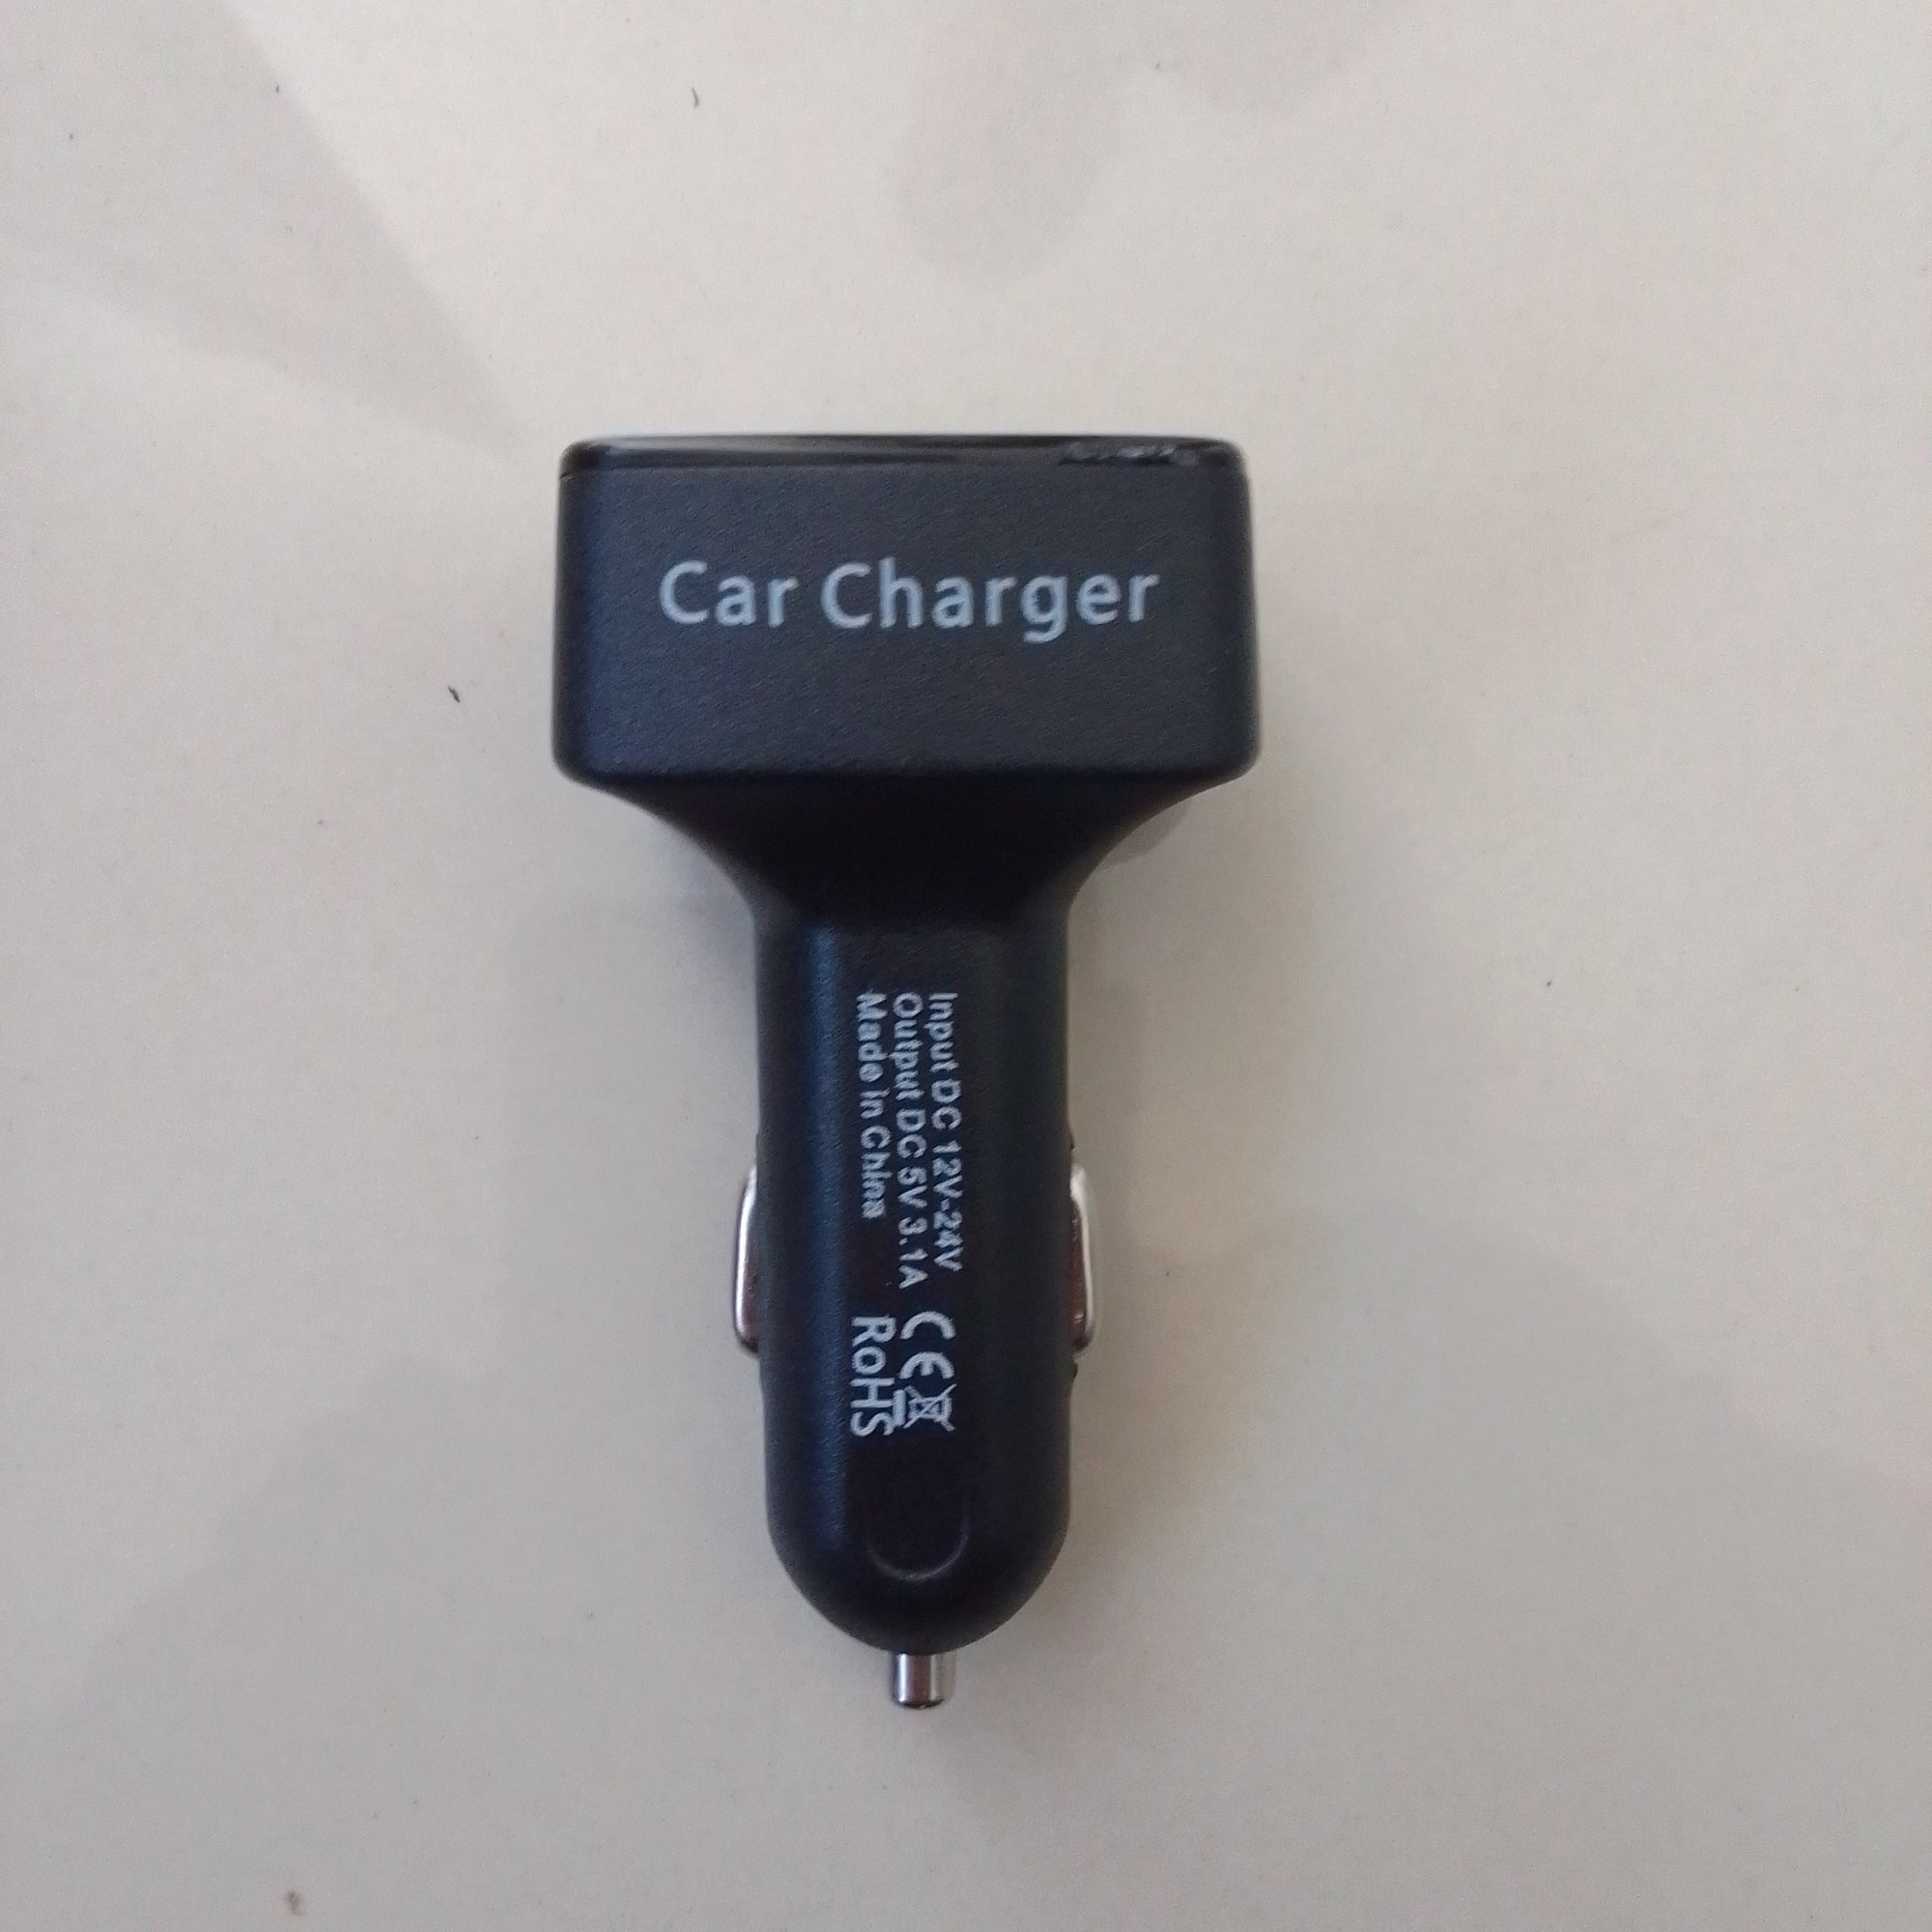 Car charger.